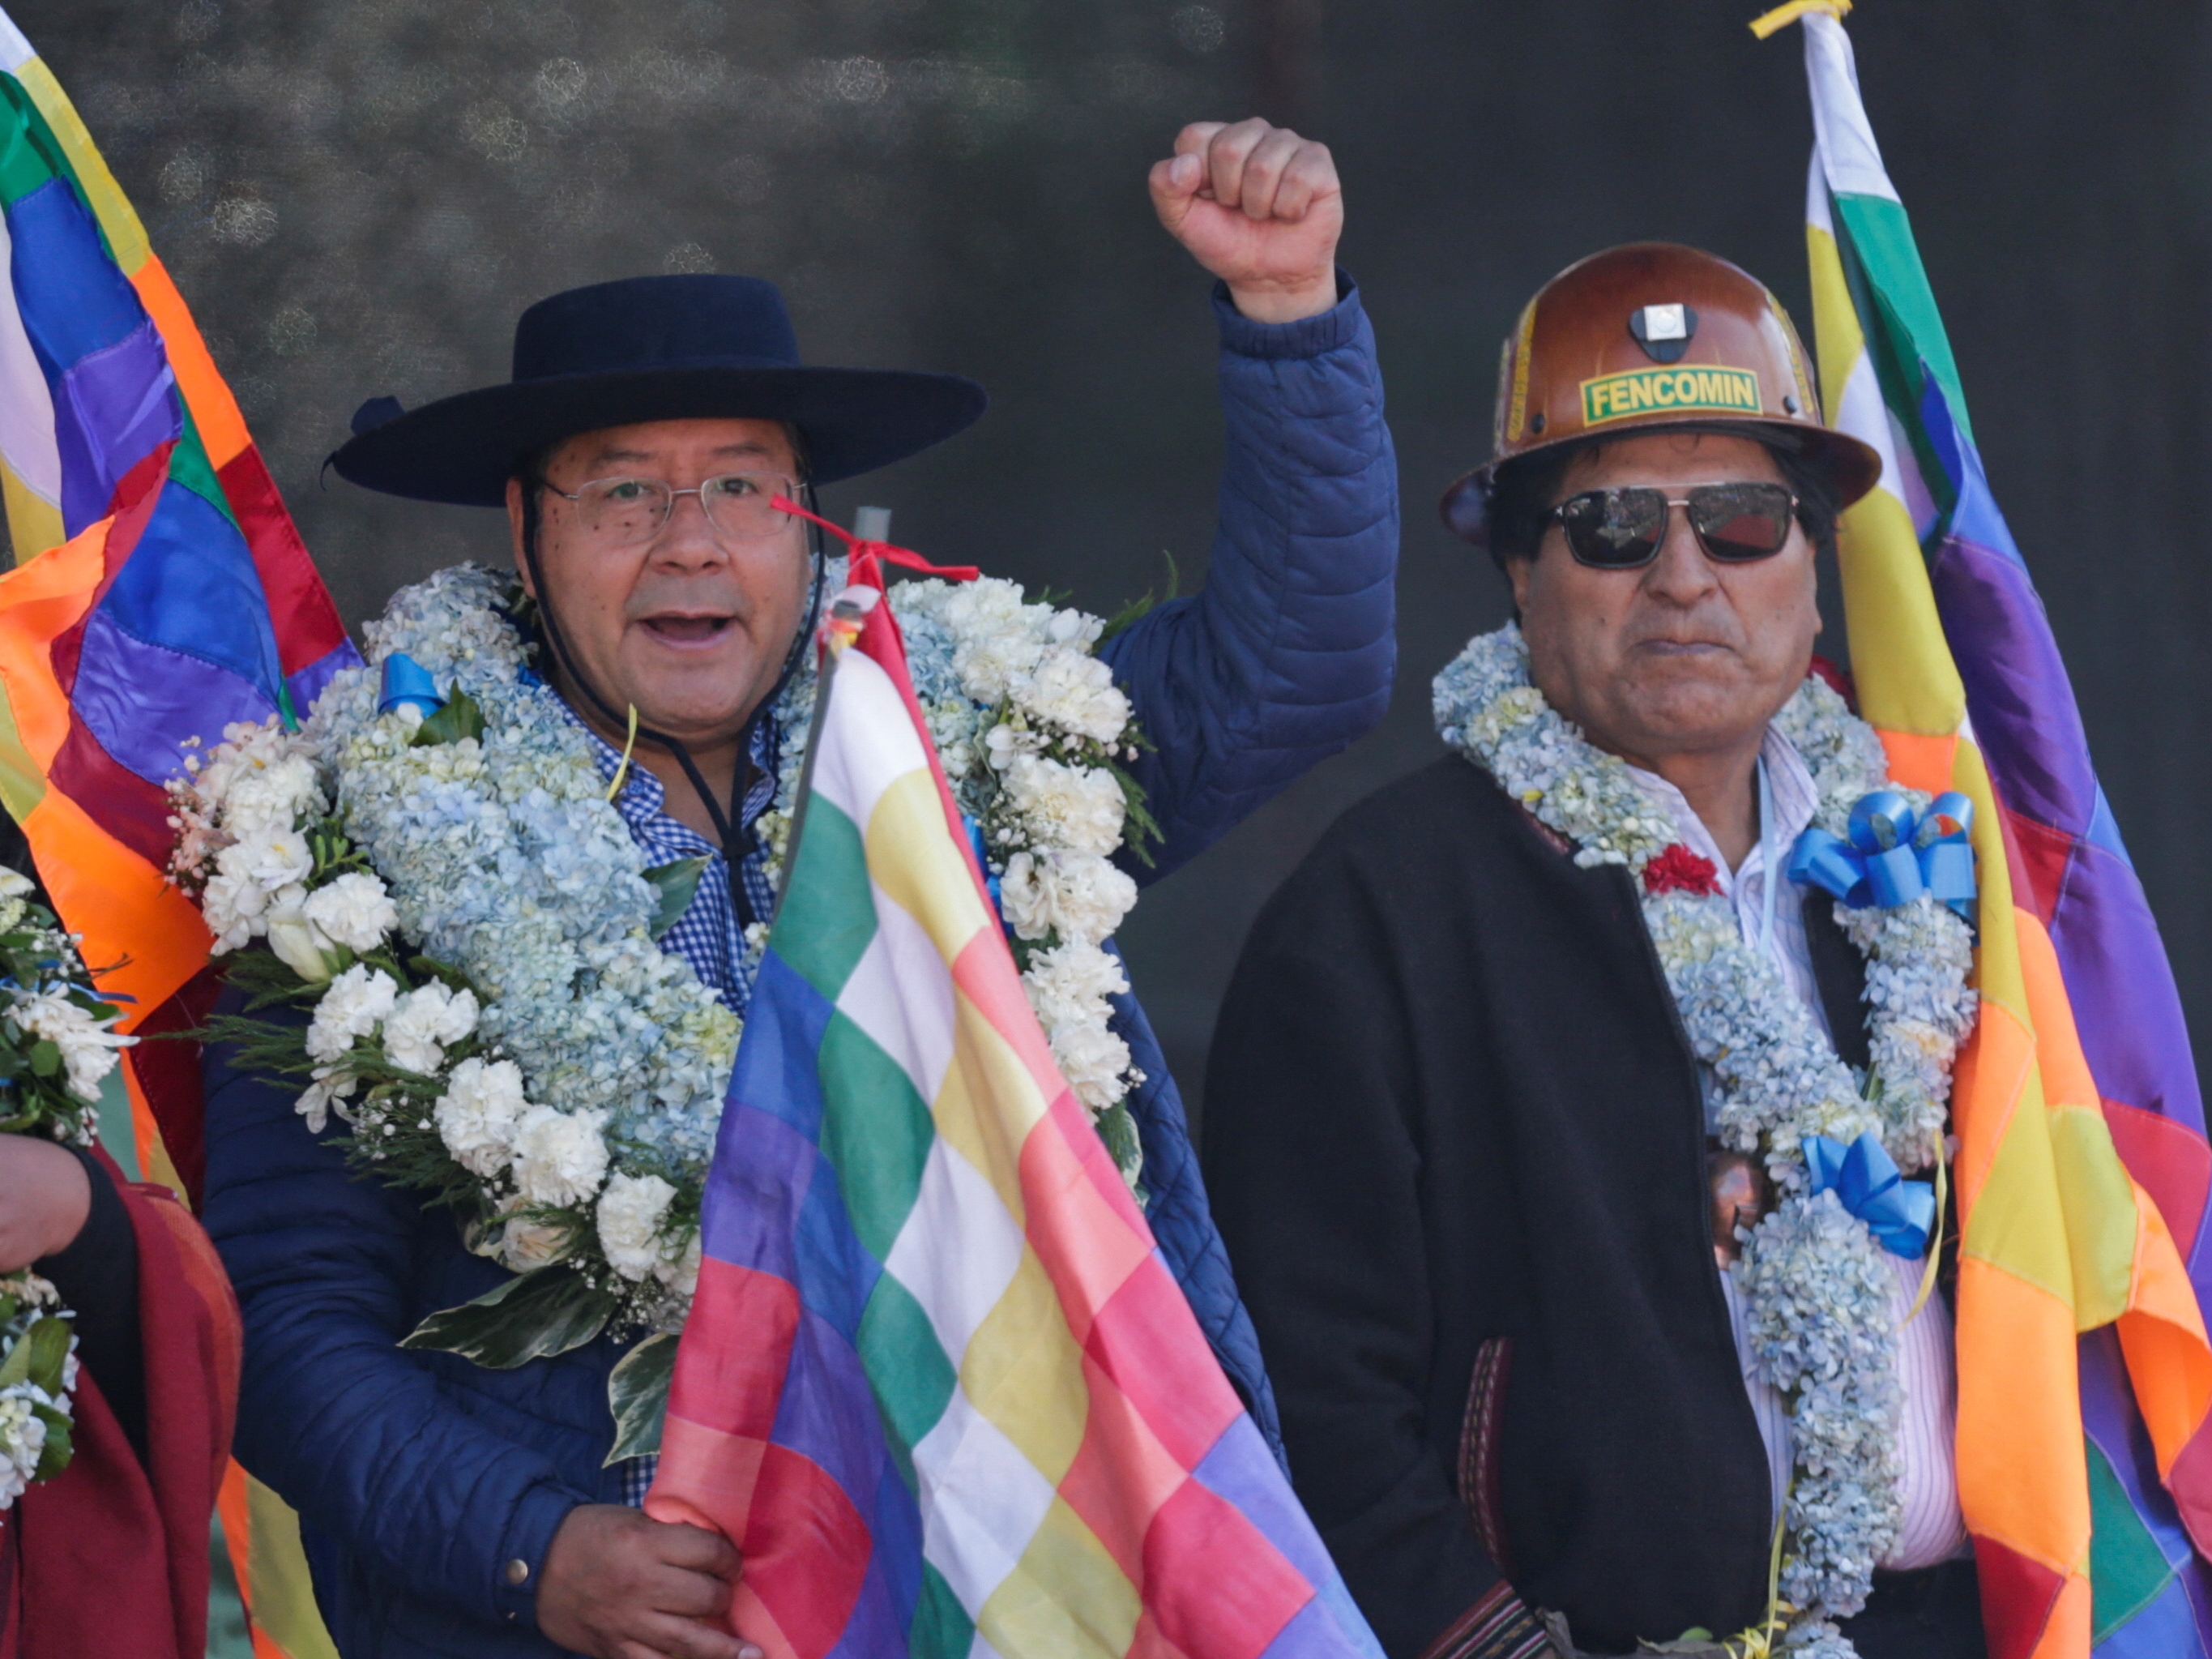 Bolivian President Luis Arce Catacora stands with former President Evo Morales as they march with supporters of the Bolivian MAS party, workers and coca producers to show their support for Arce's government in La Paz, Bolivia.  REUTERS/Manuel Claire